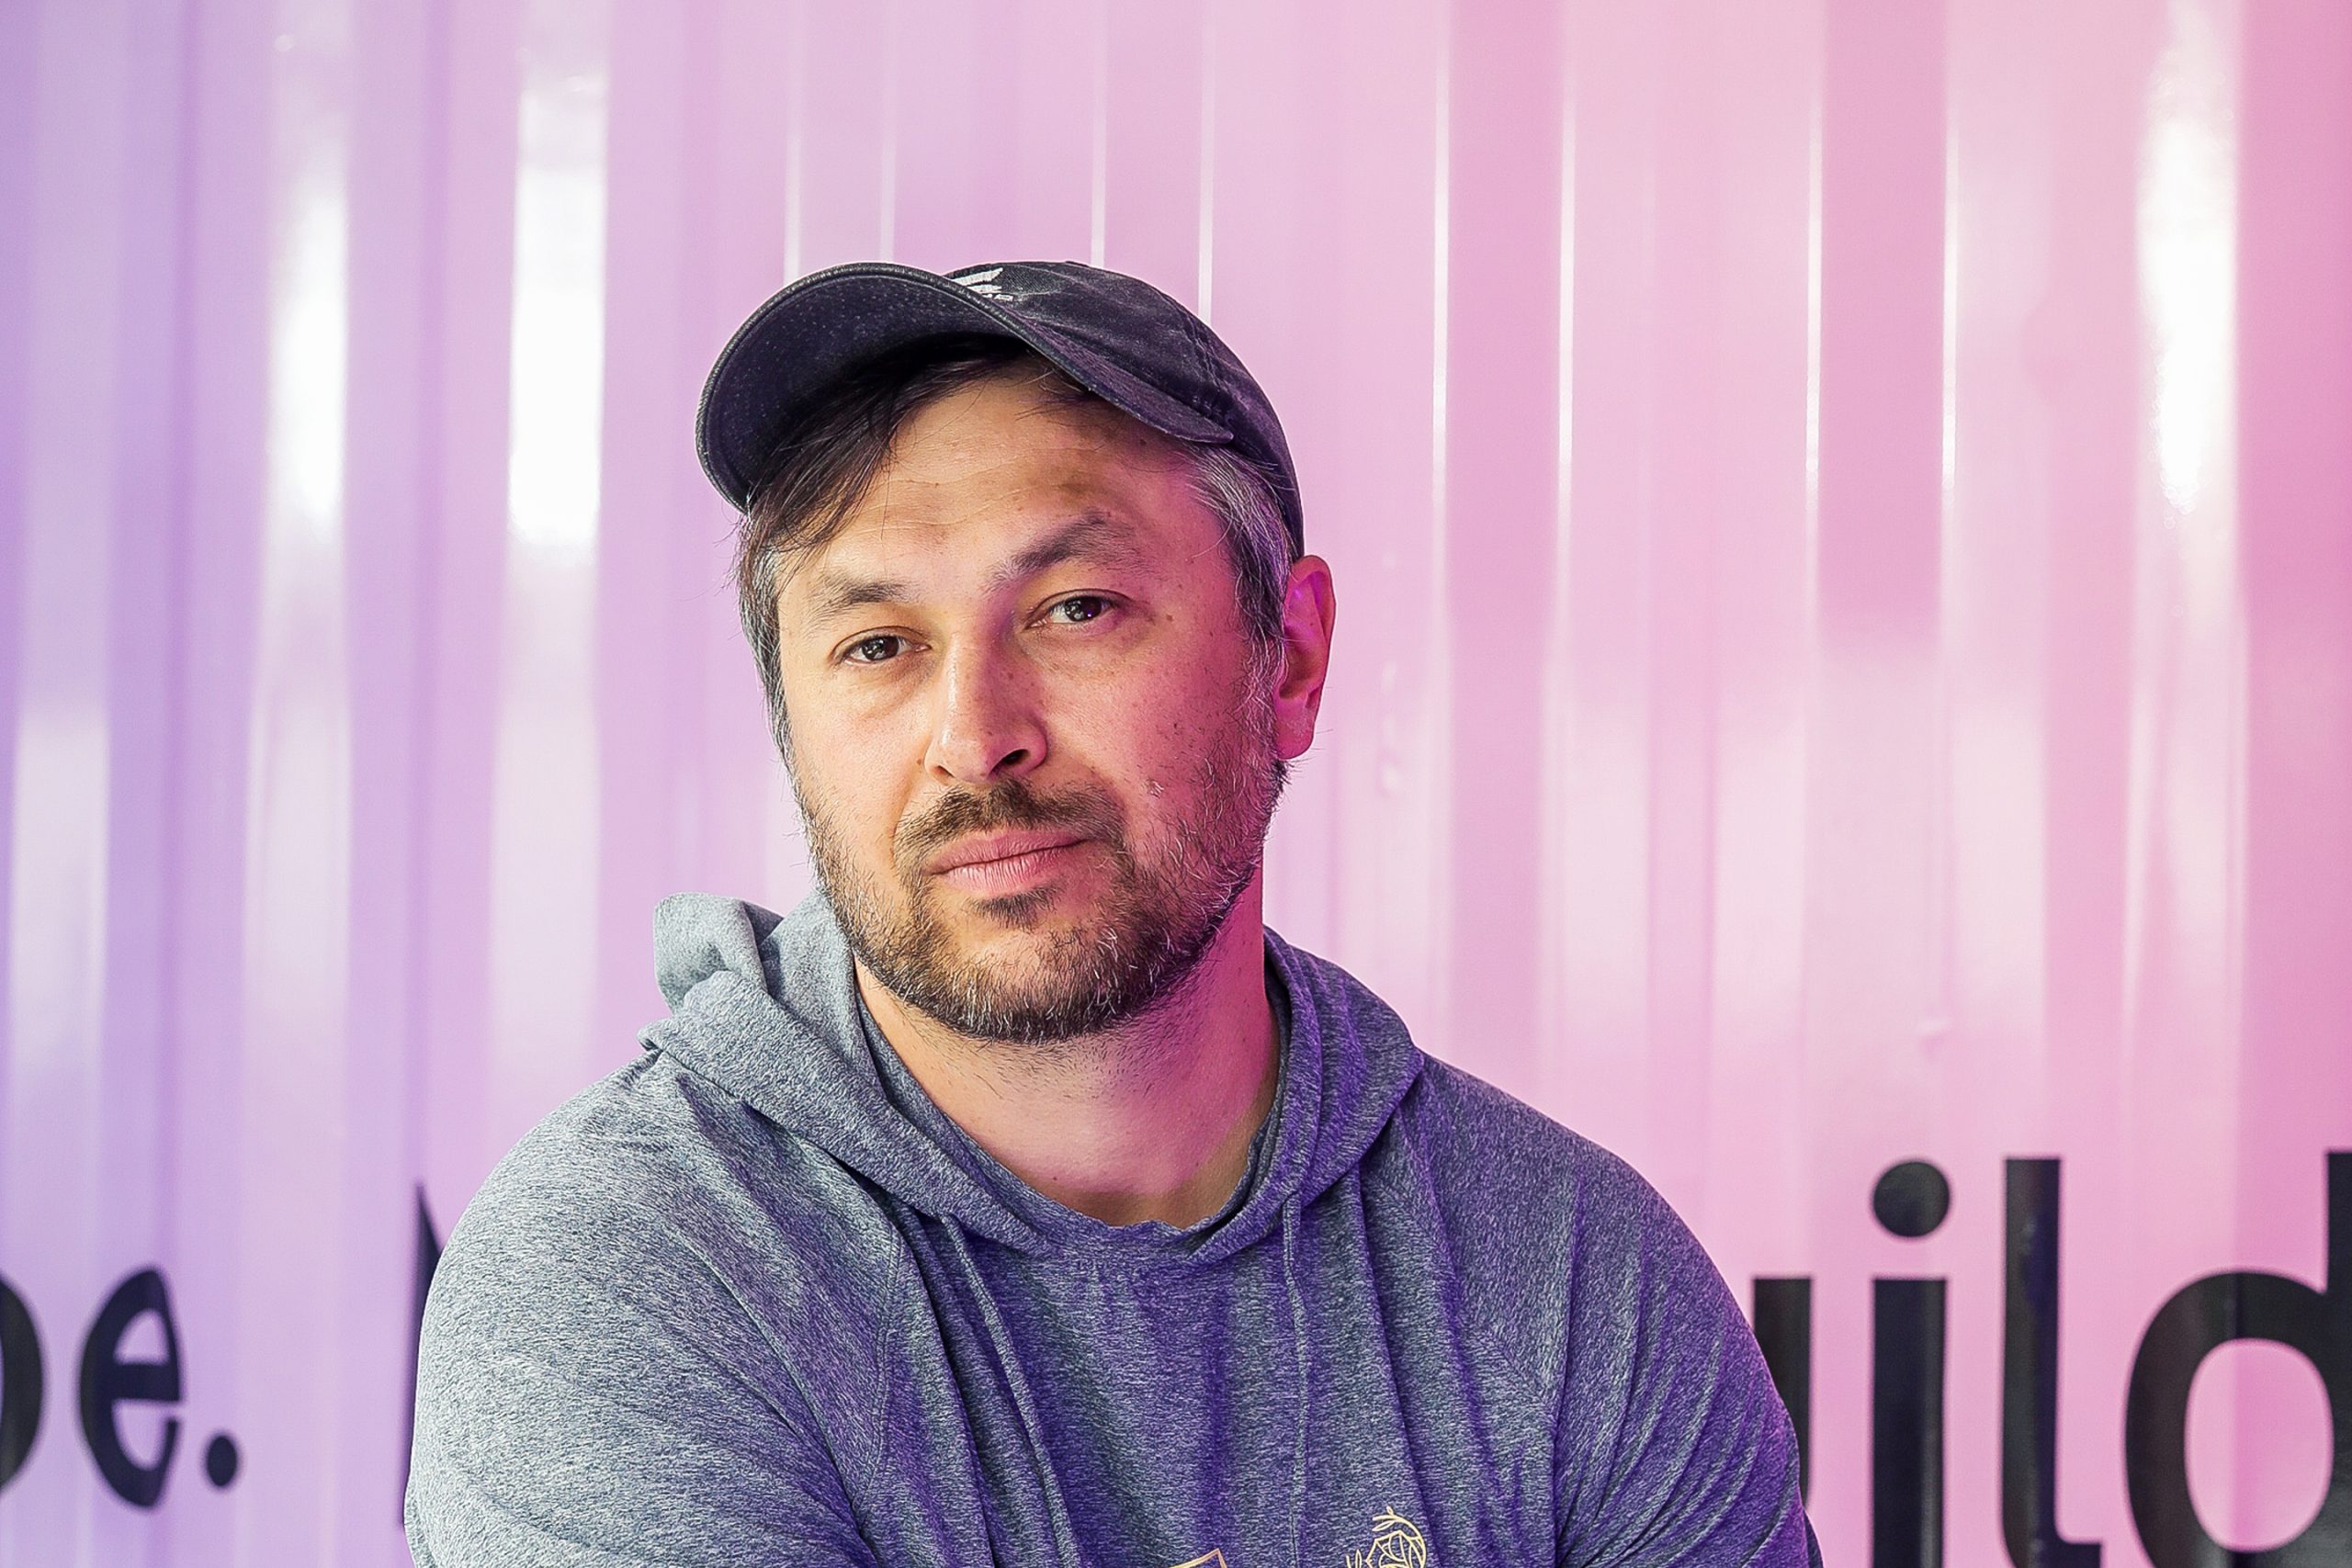 The Ukrainian-born engineer behind Solana Labs learned to code as a teen and had a 'lightbulb' moment about the blockchain